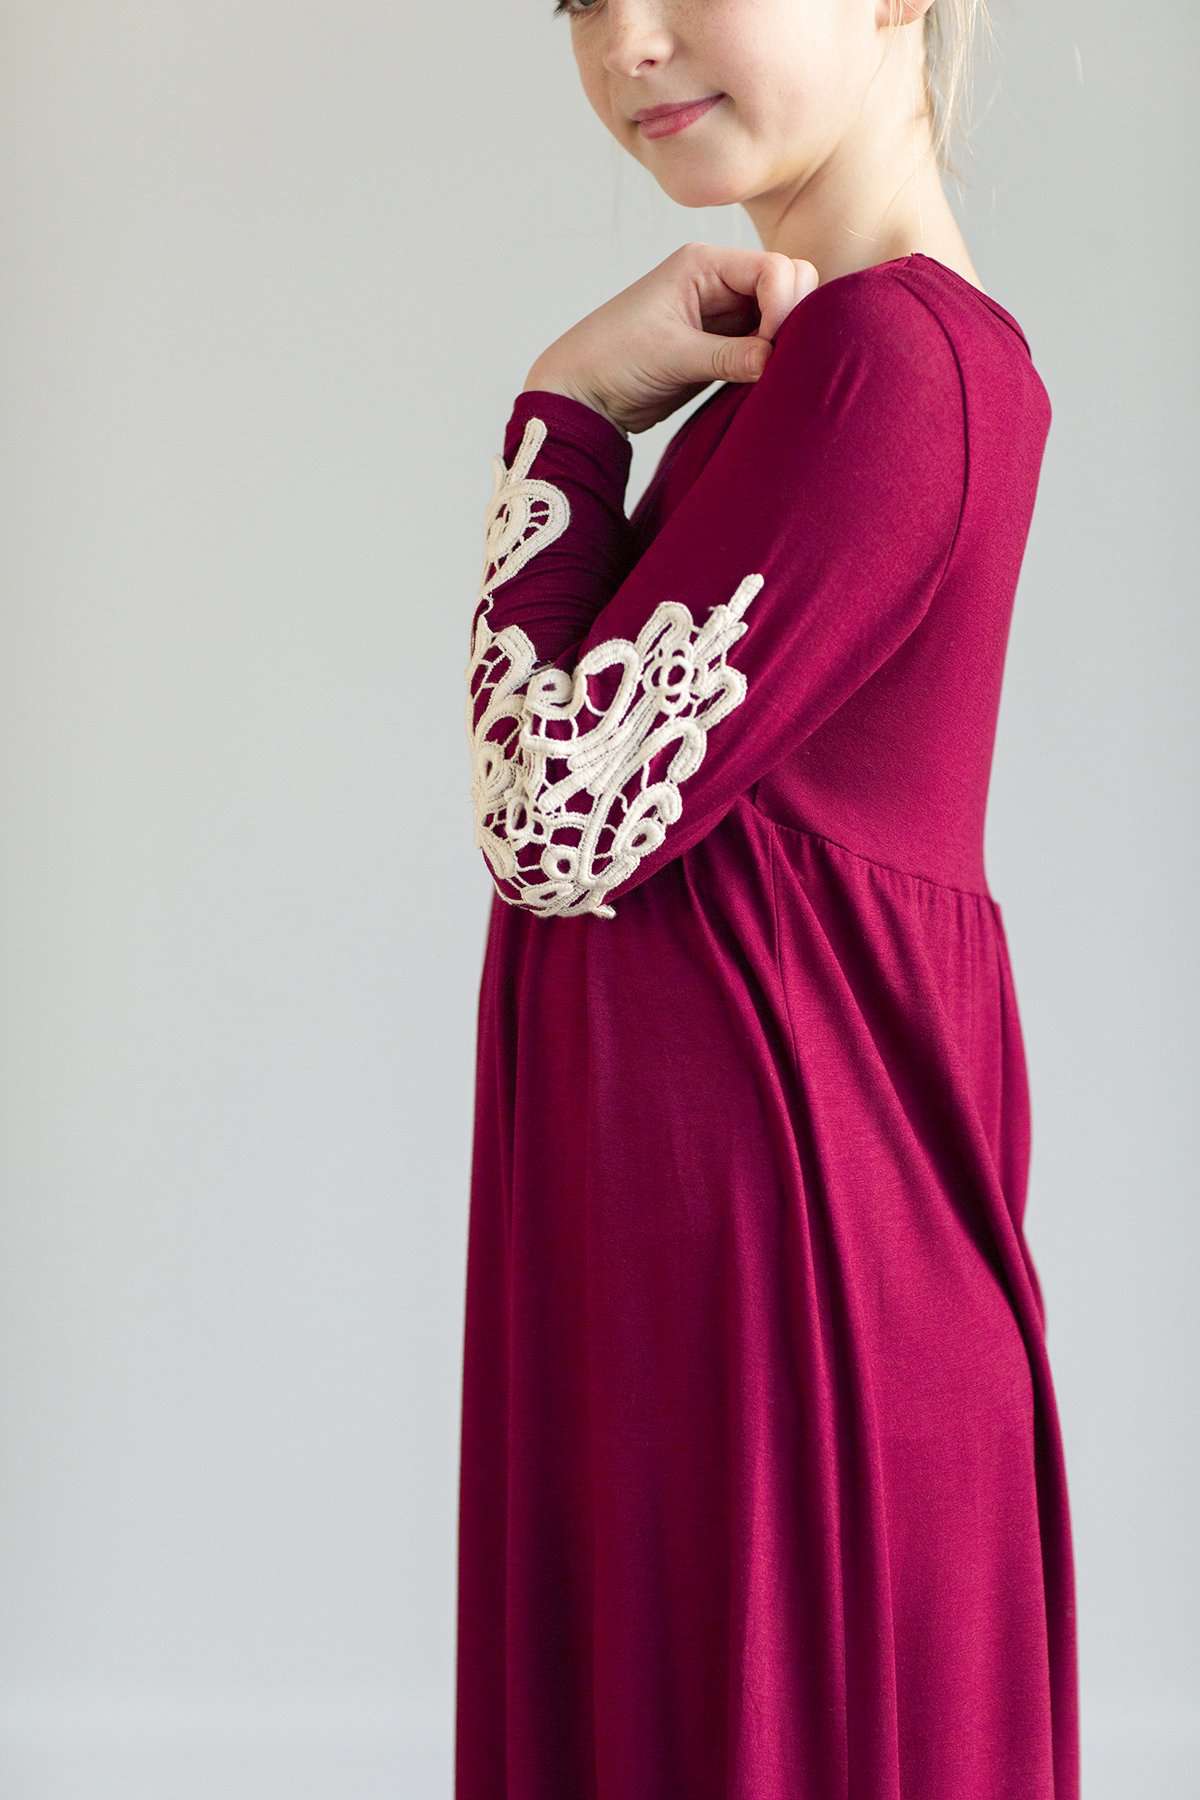 Young girl wearing a burgandy maxi dress with crochet detail.